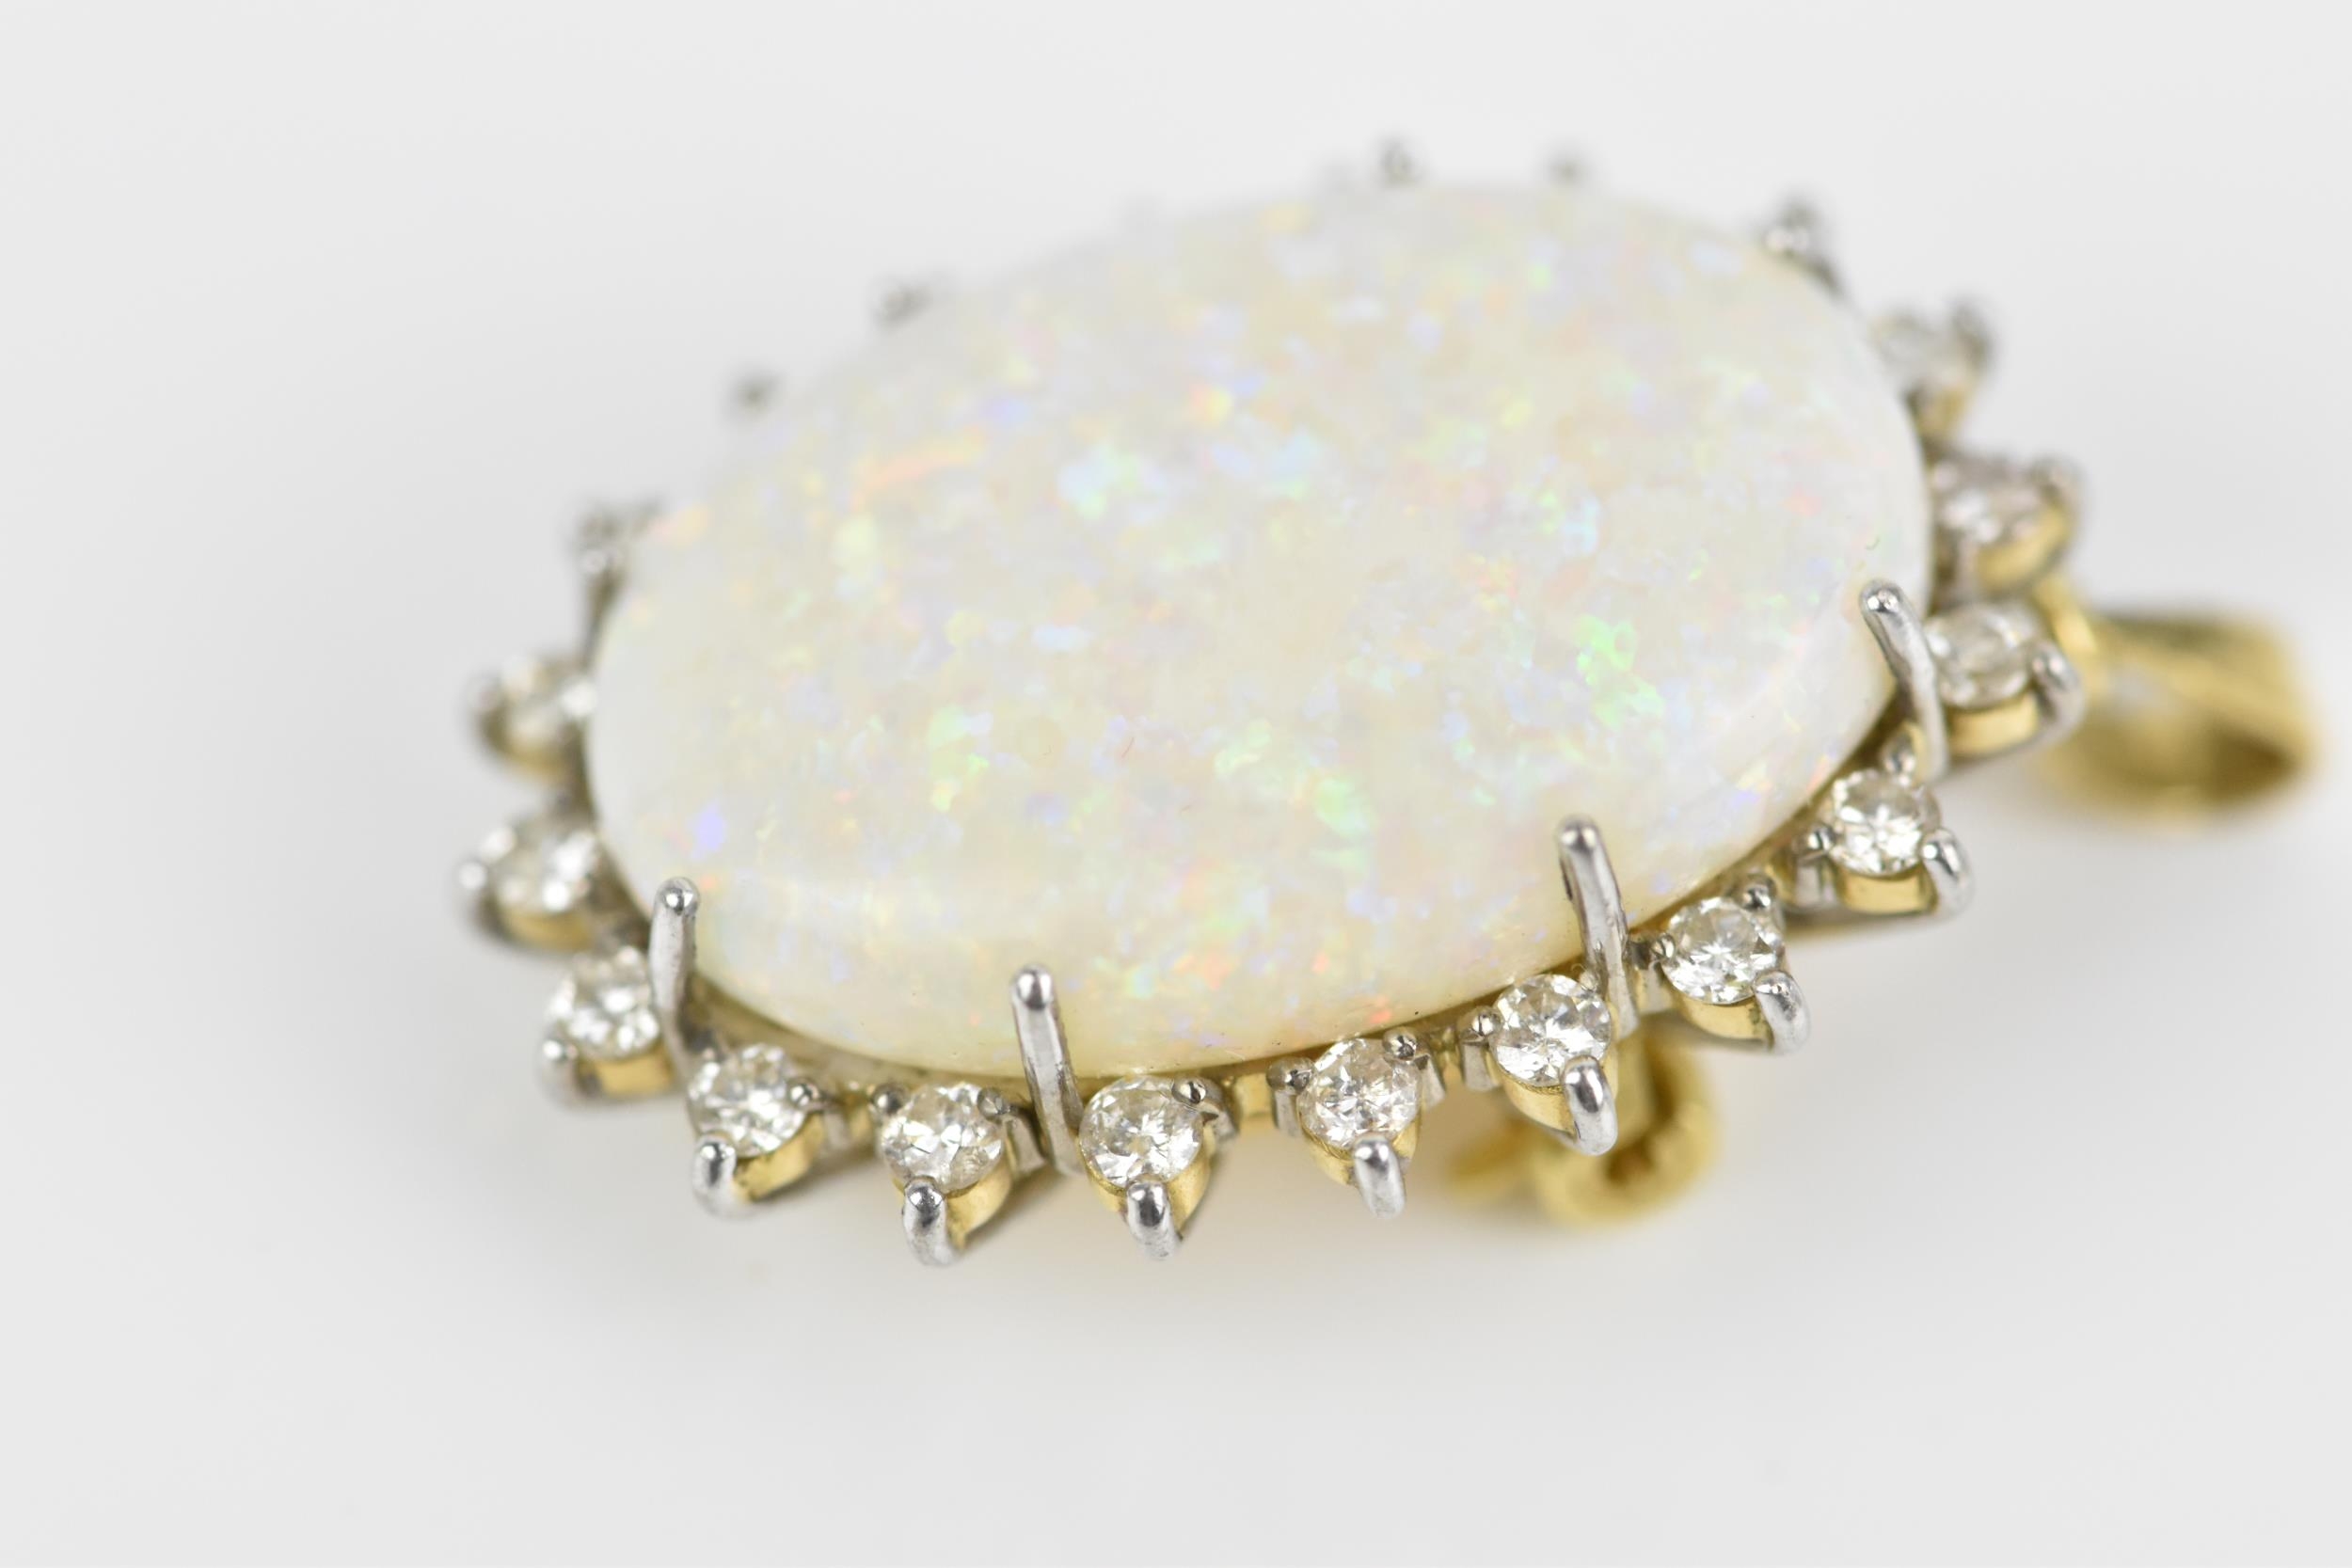 An 18ct yellow gold, white metal, diamond and white opal pendant/brooch, of oval design with central - Image 2 of 6